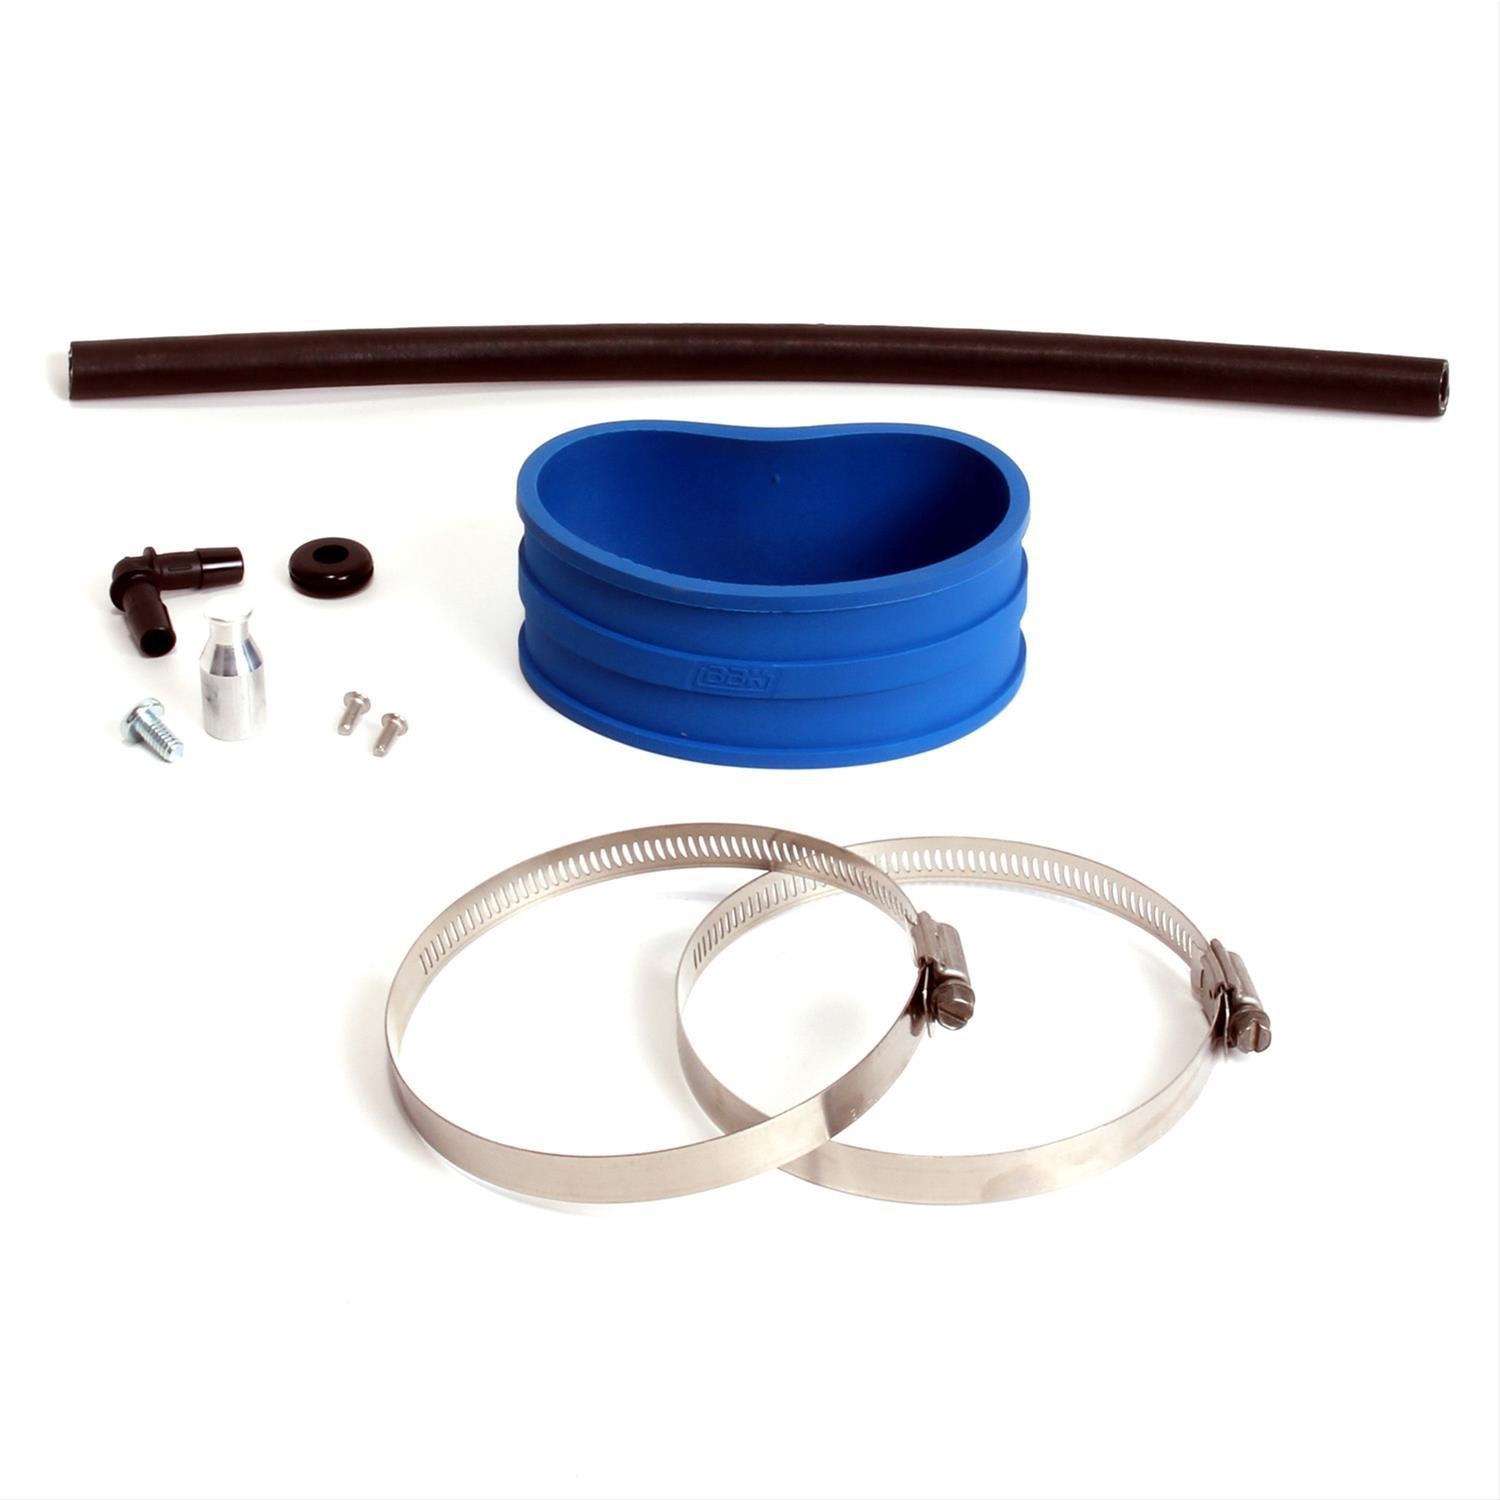 Cold Air Intake Replacement Hose, Clamp and Hardware Kit 2010-15 Camaro LS3/L99